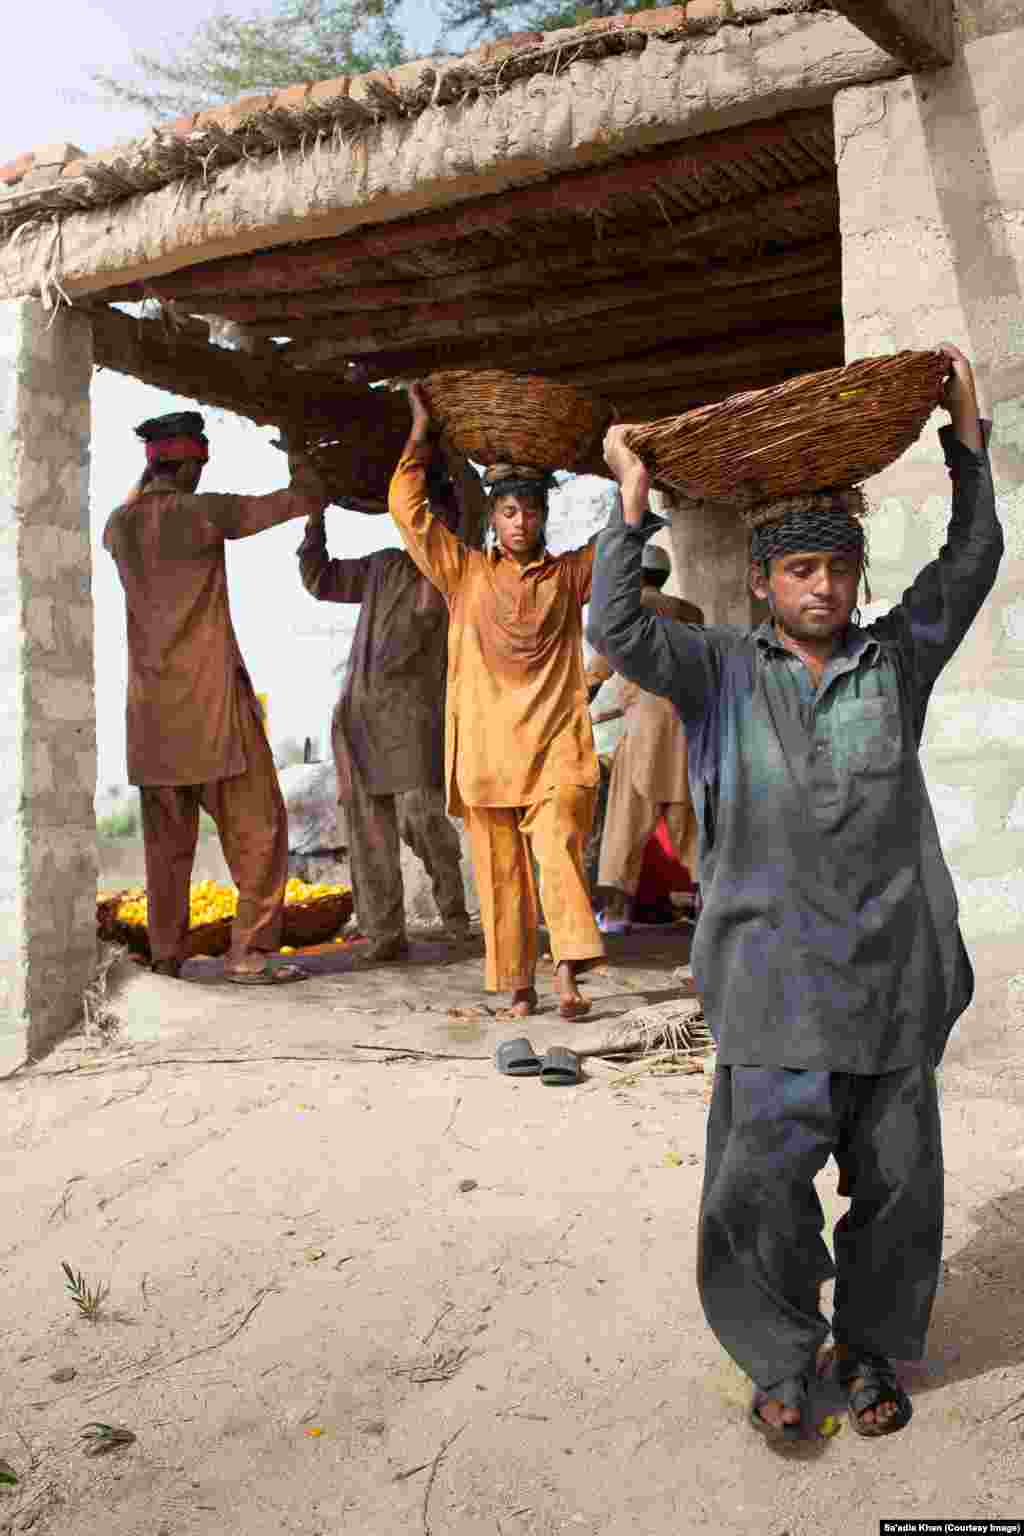 Workers carry the cooked dates to the next stage of the production process. The cooked dates are laid to dry and occasional turned to allow all sides of the fruit to catch the scorching sun.